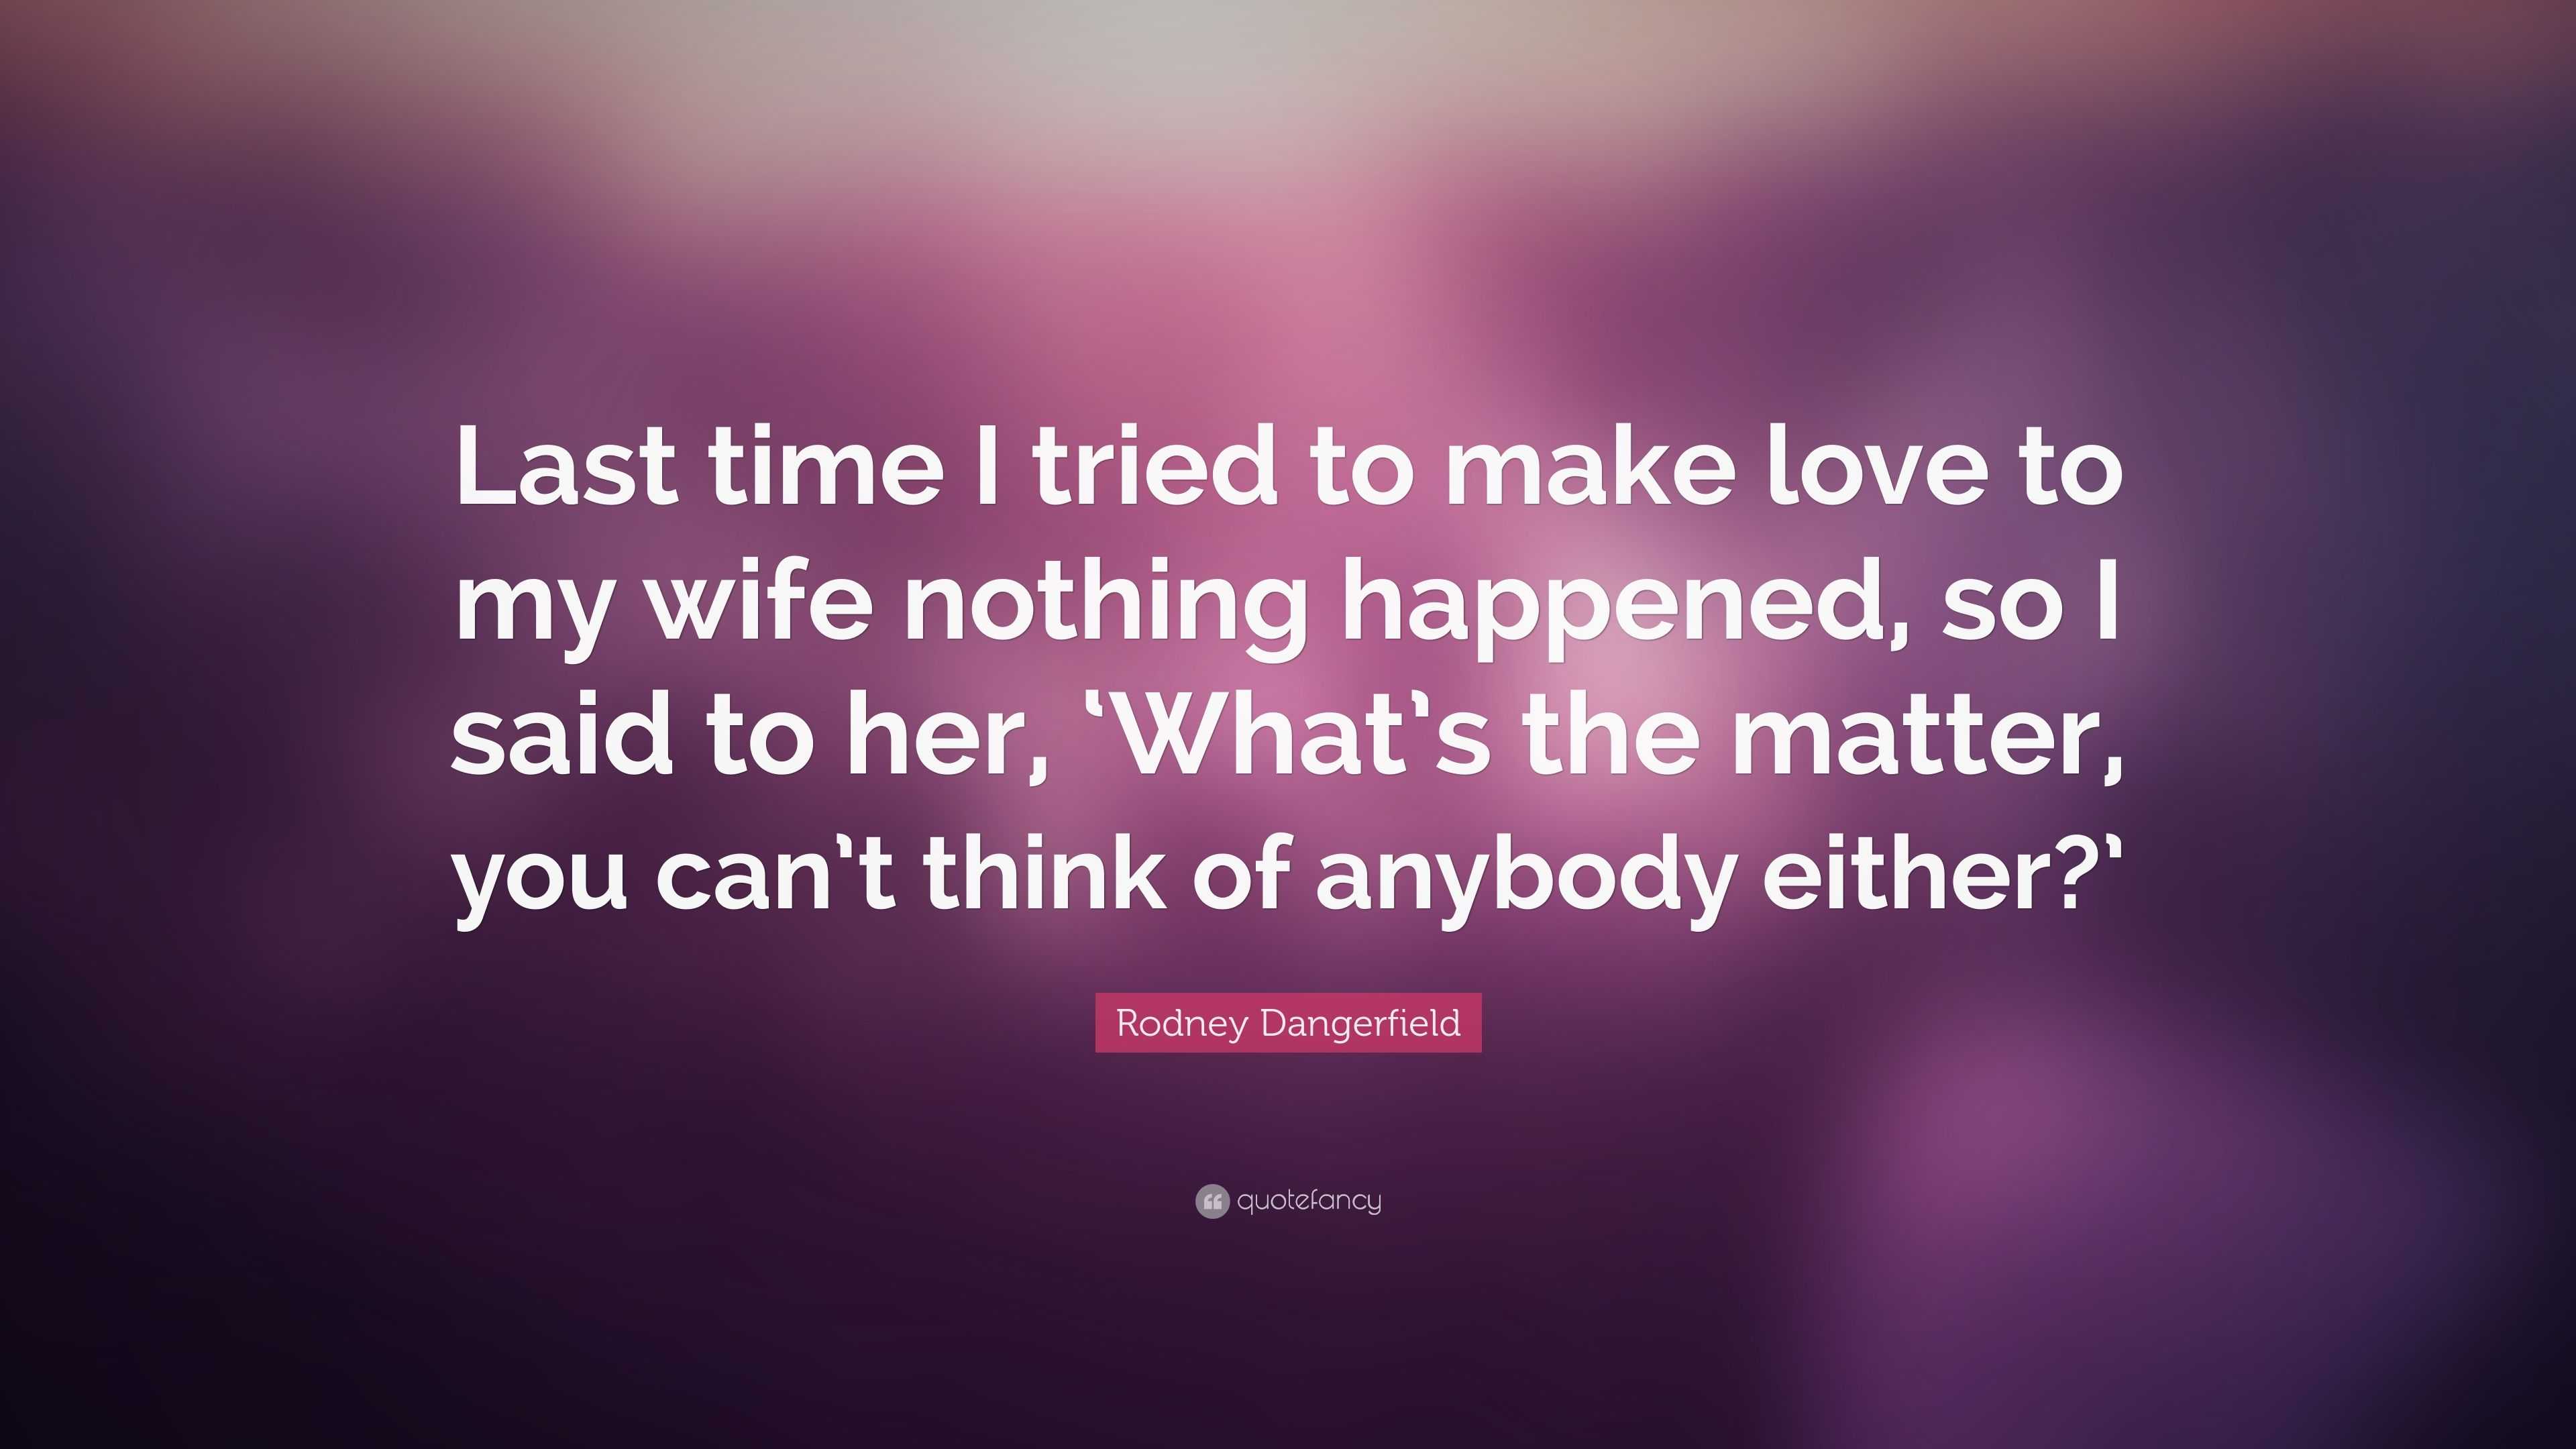 The last time I made love to my wife - Rodney Dangerfield